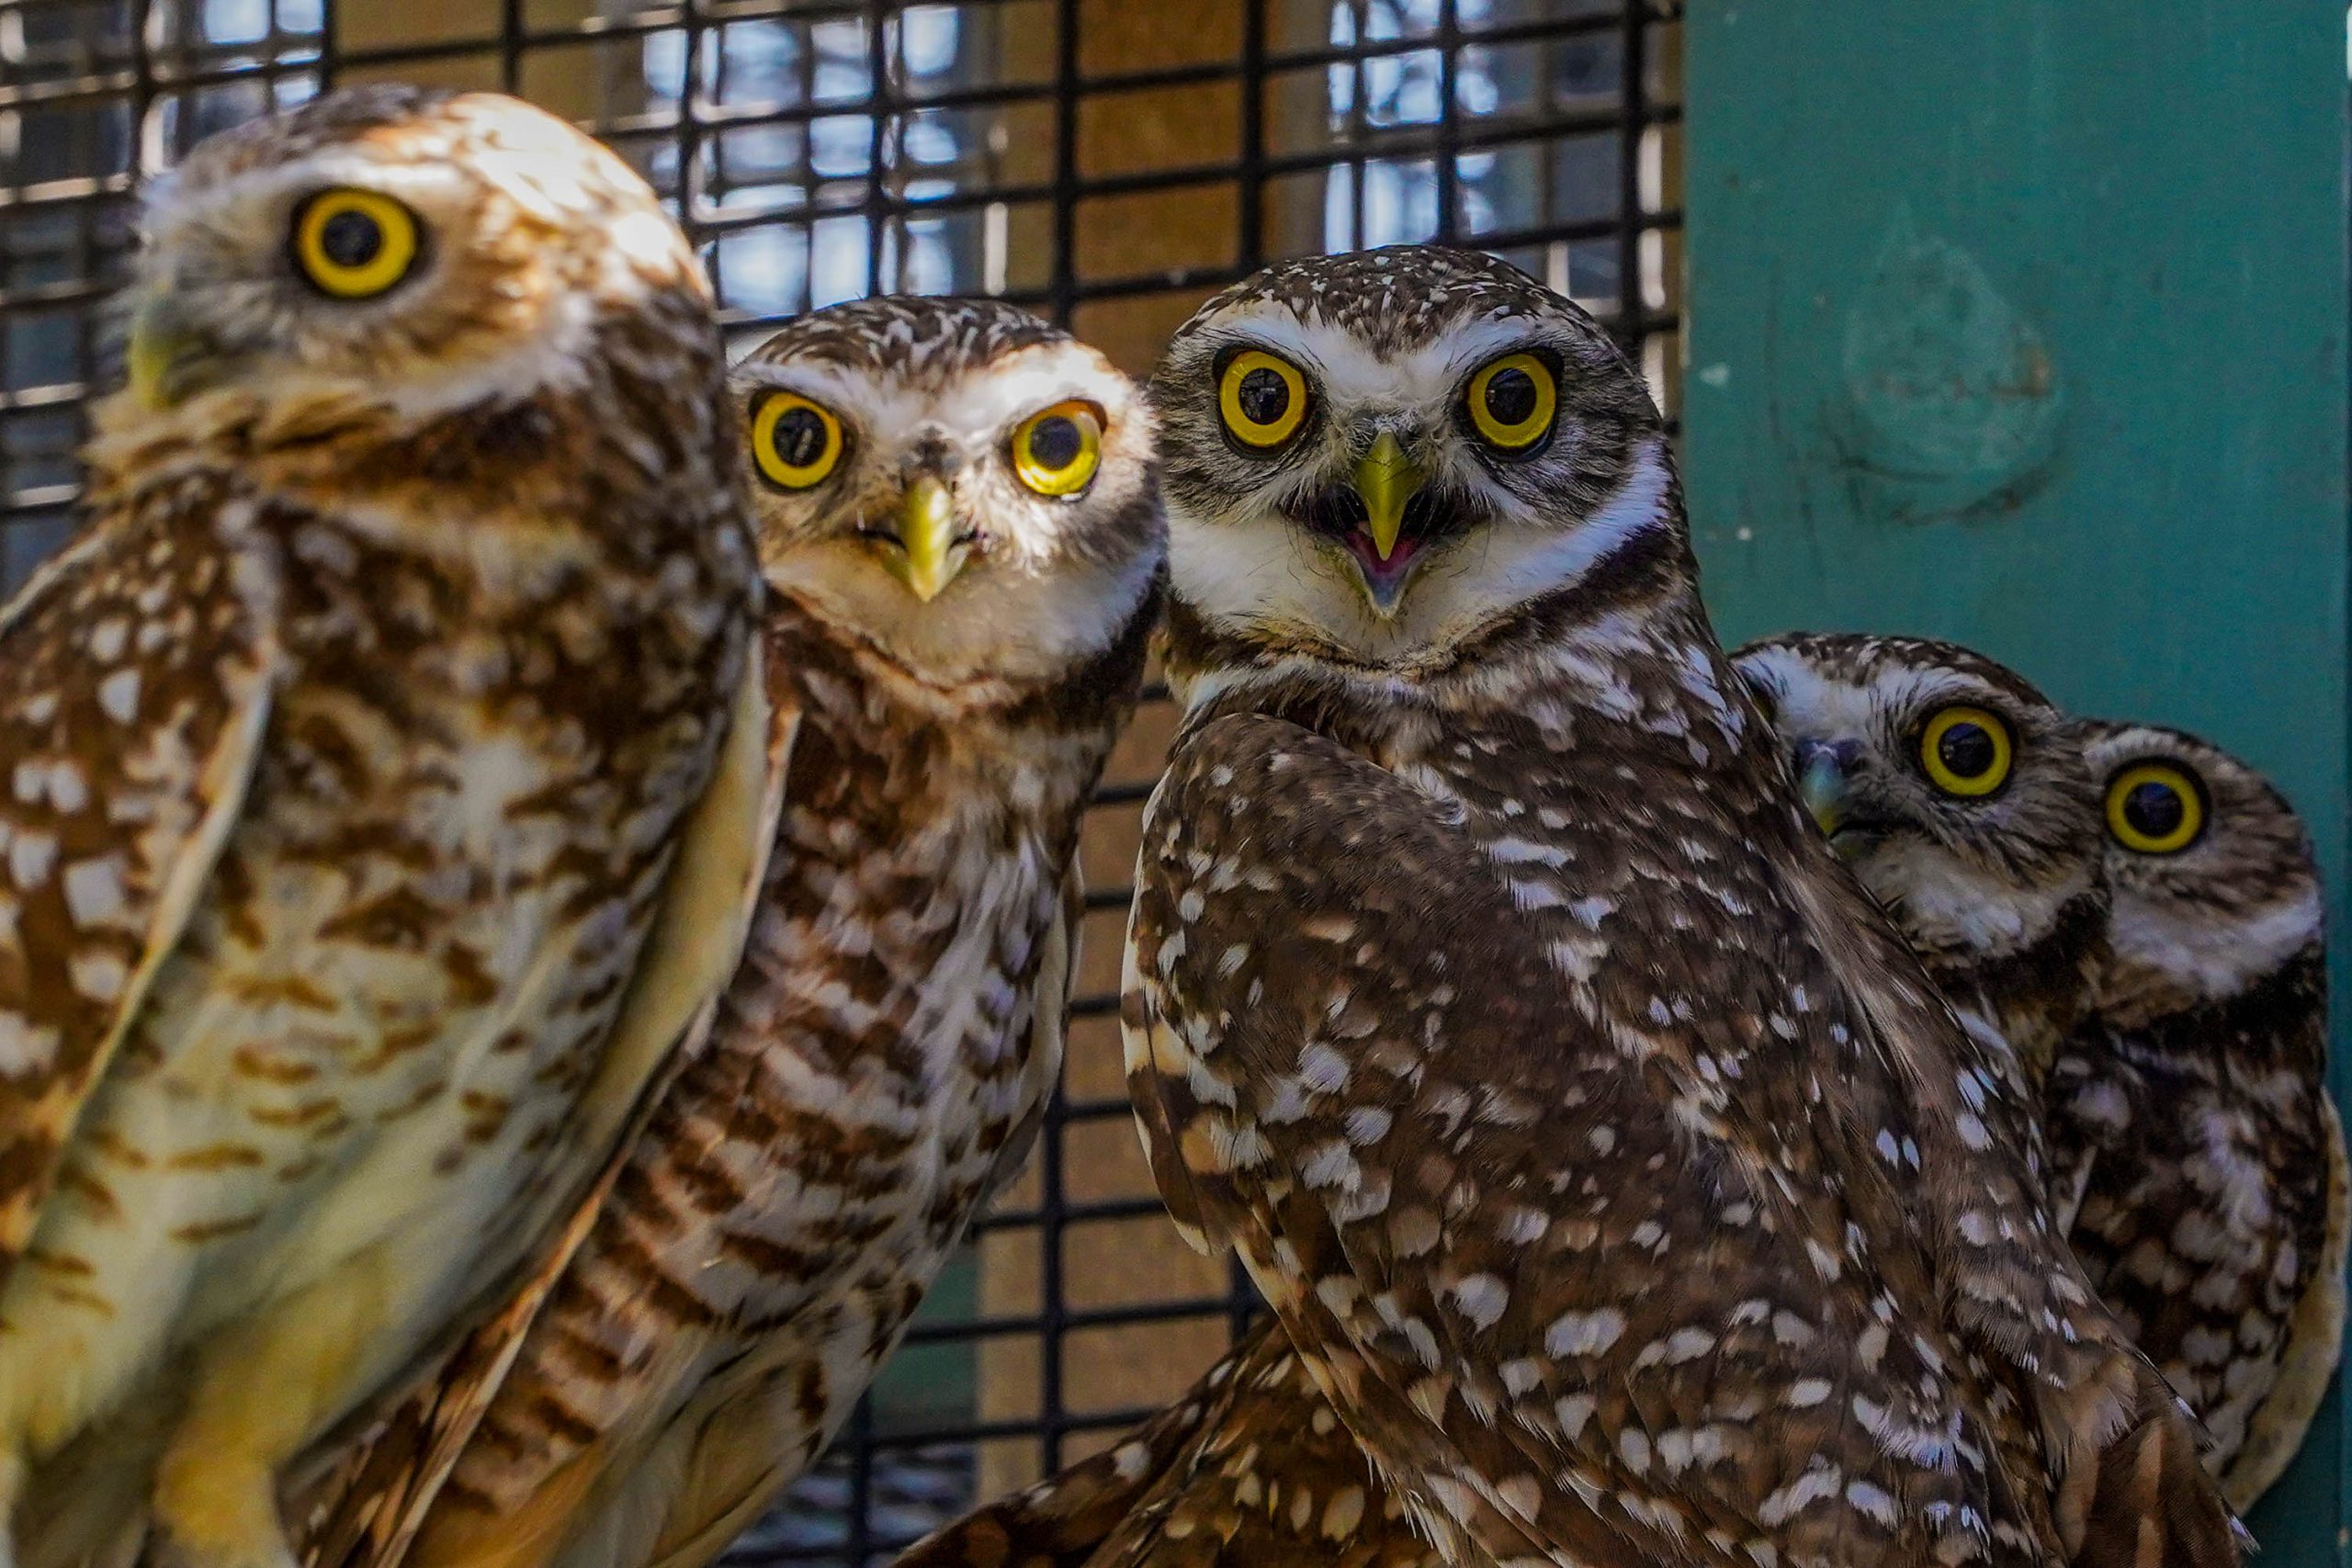 Burrowing owls’ habitat losses have wildlife experts working to relocate them